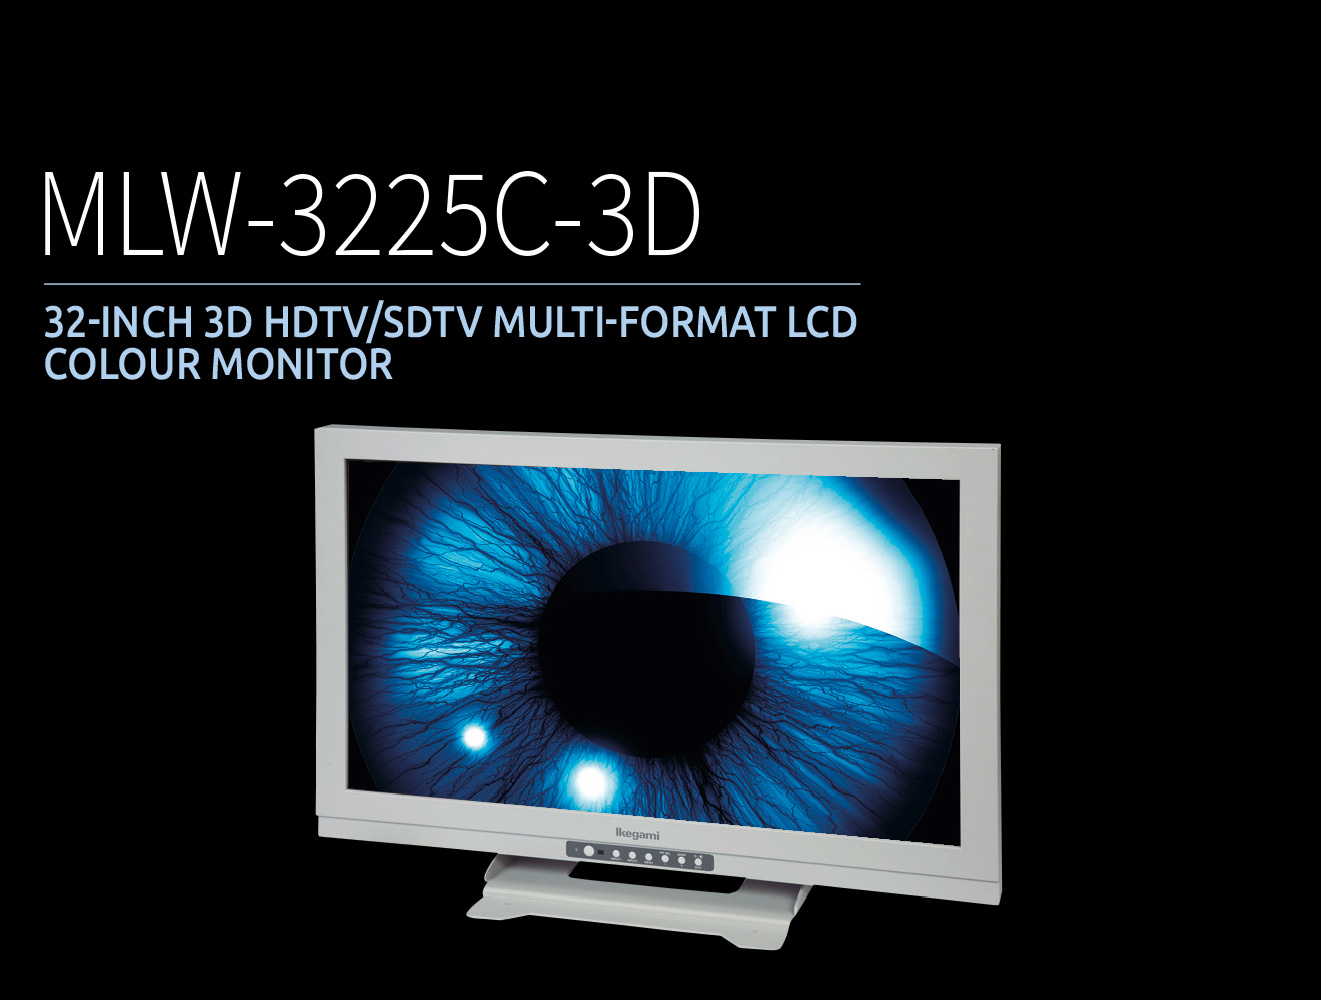 MLW-3225C-3D